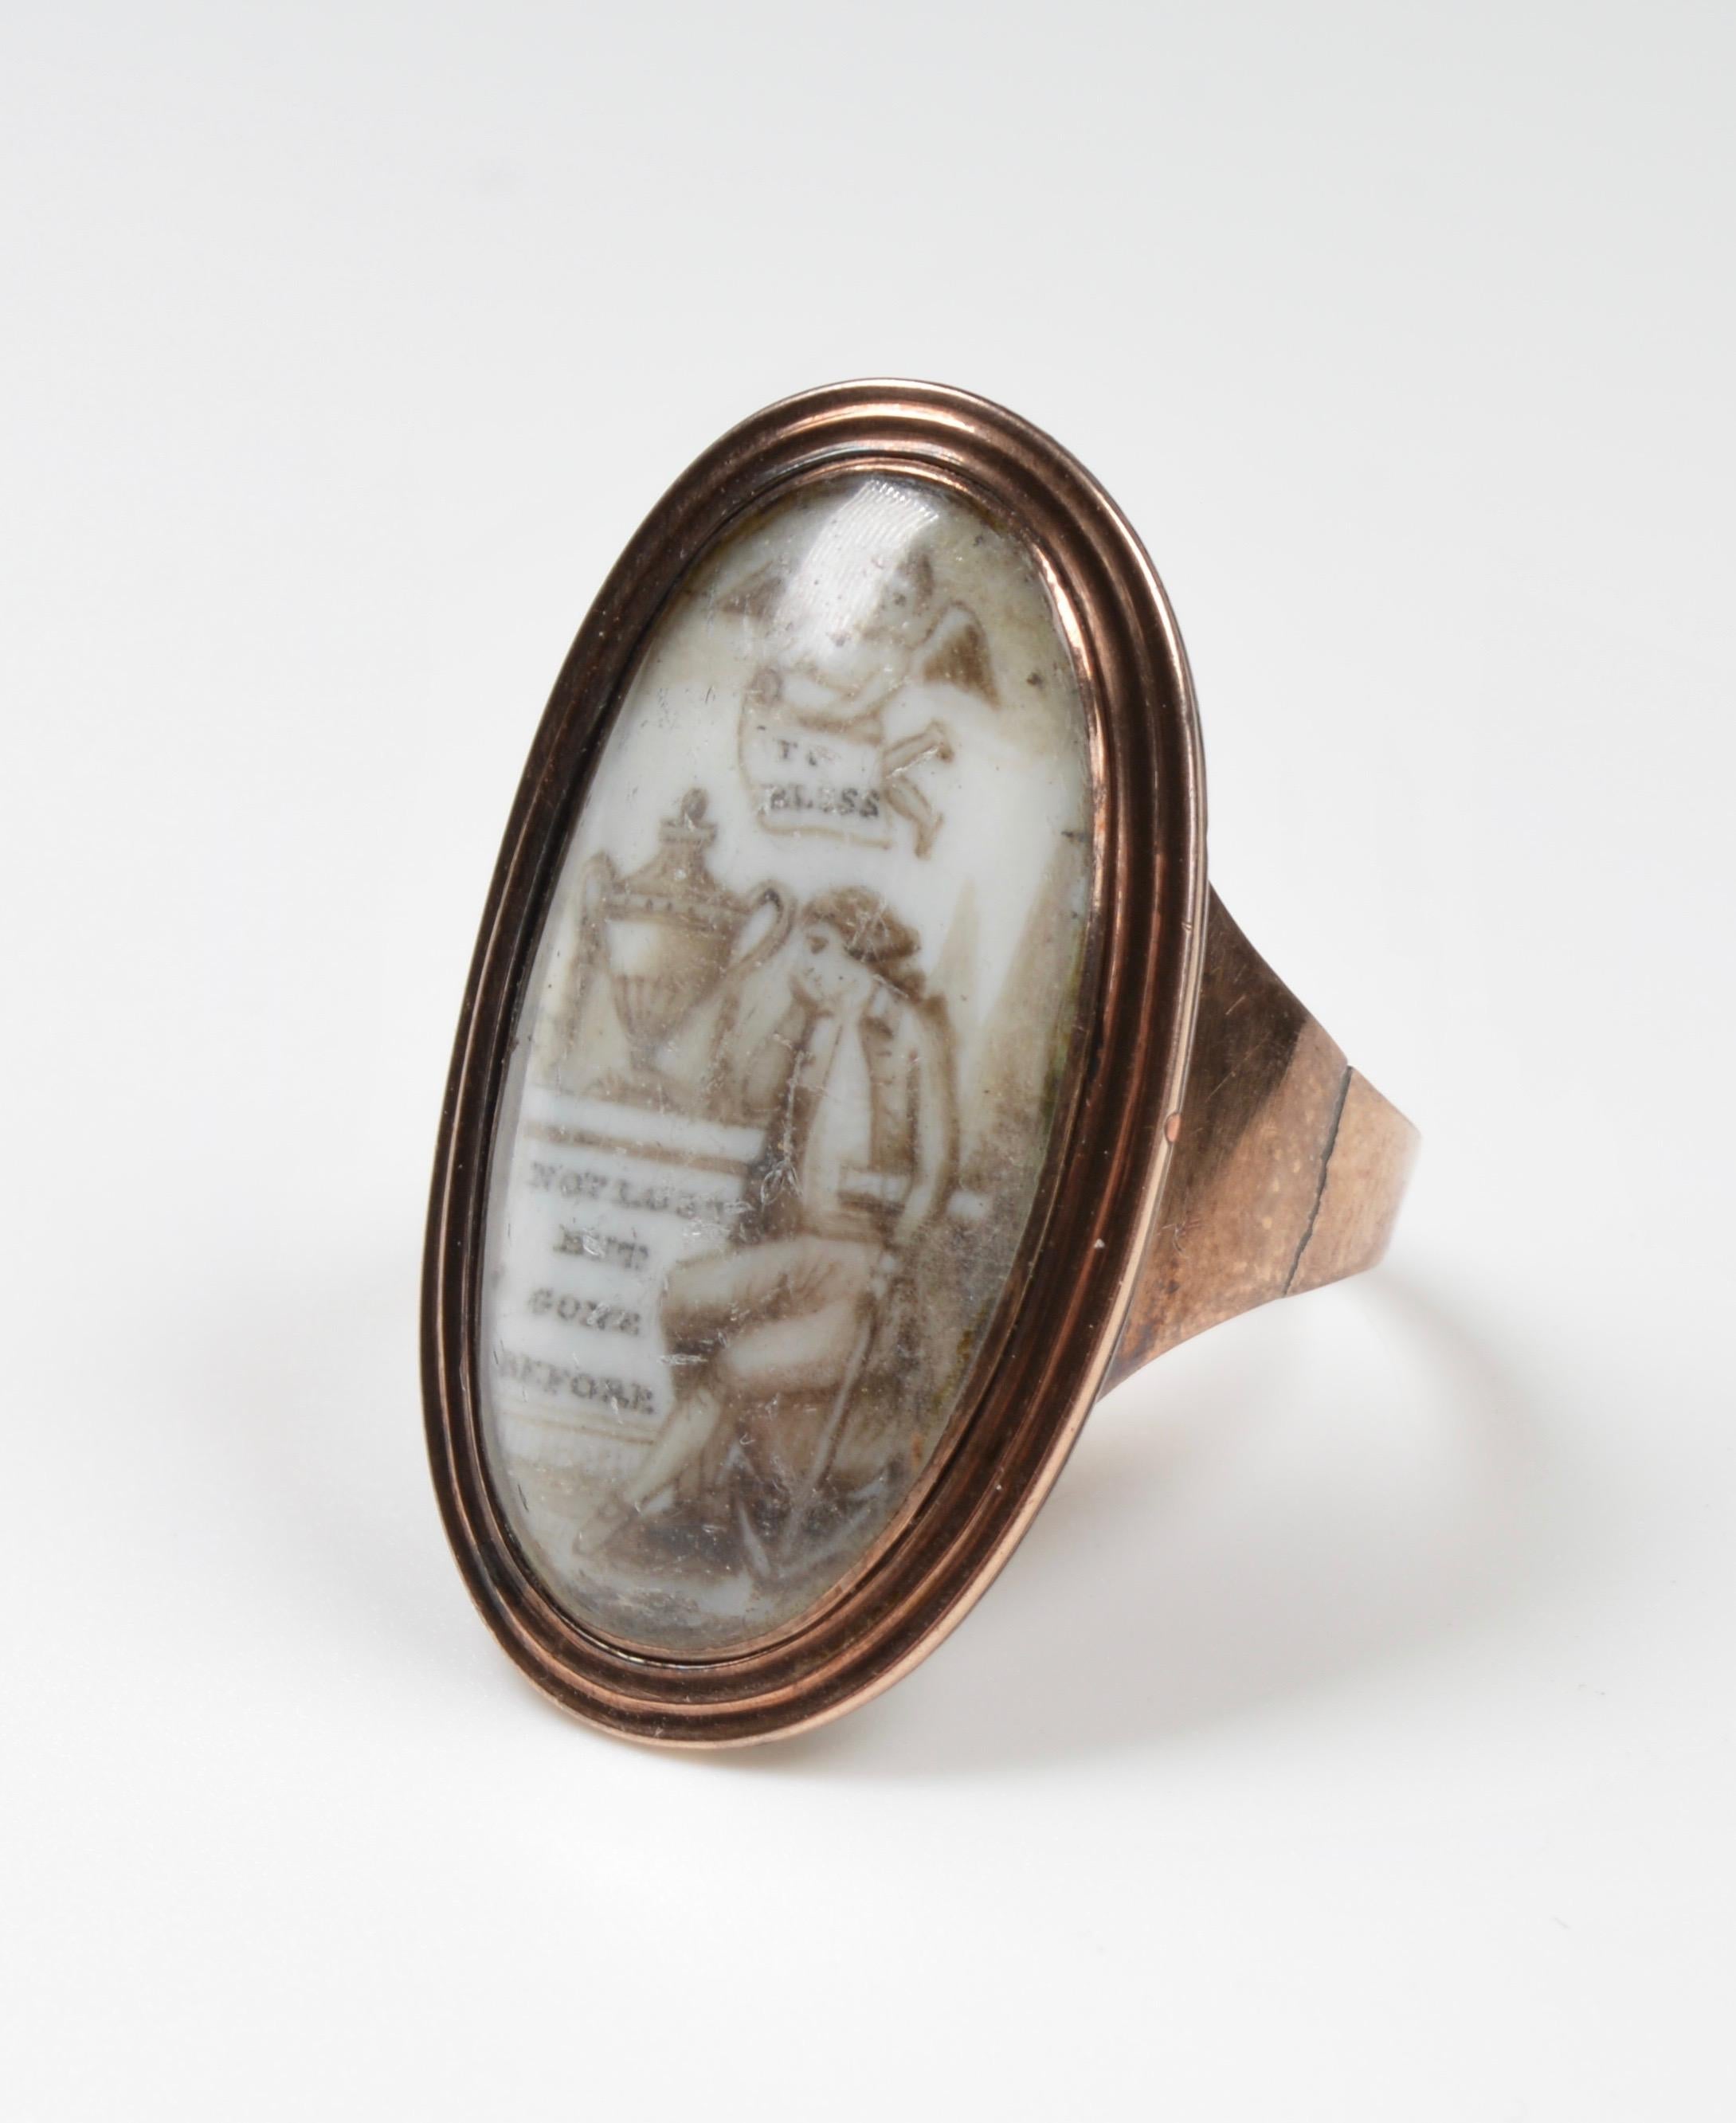 Late Georgian enamel gold and enamel mourning ring
In the late 18th century mourning rings featuring neoclassical sepia miniatures like this became extremely popular. These tiny paintings were done by hand and could be commissioned, or purchased